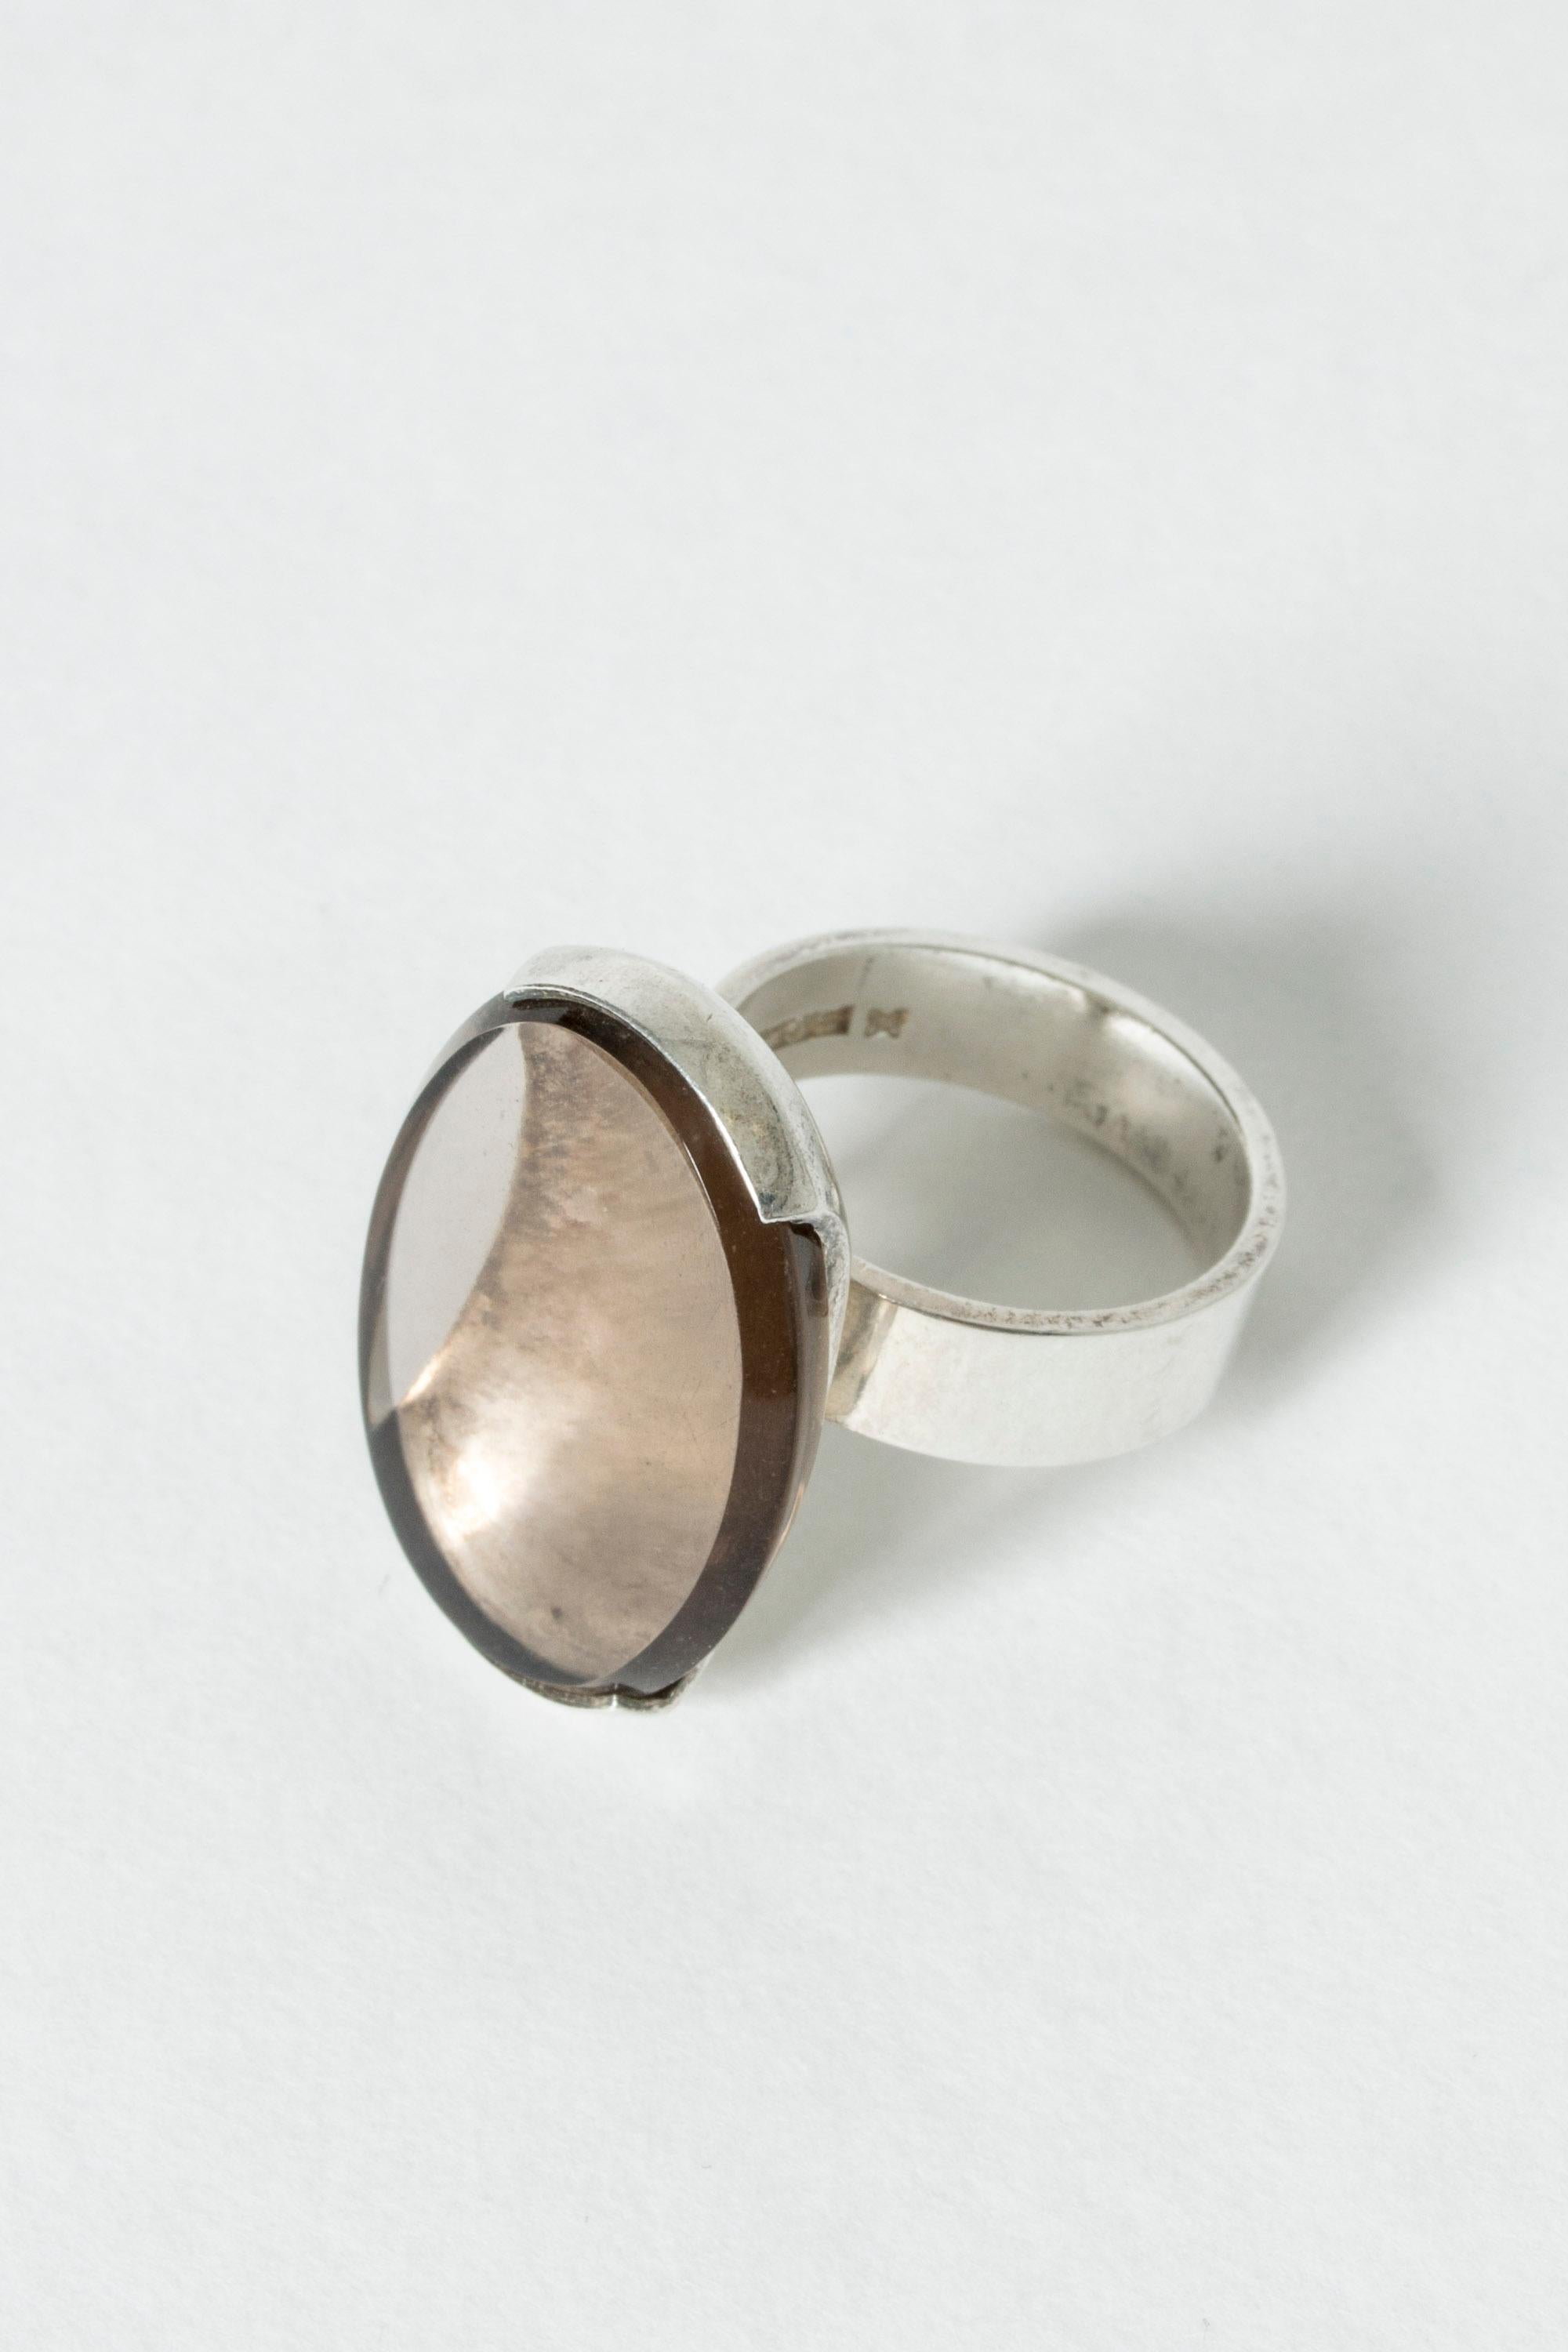 Amazing silver ring by Elis Kauppi, with a large, almond shaped smoke quartz stone. The silver setting elevated the stone so that light comes in from underneath and the sides. Beautiful optical effect.